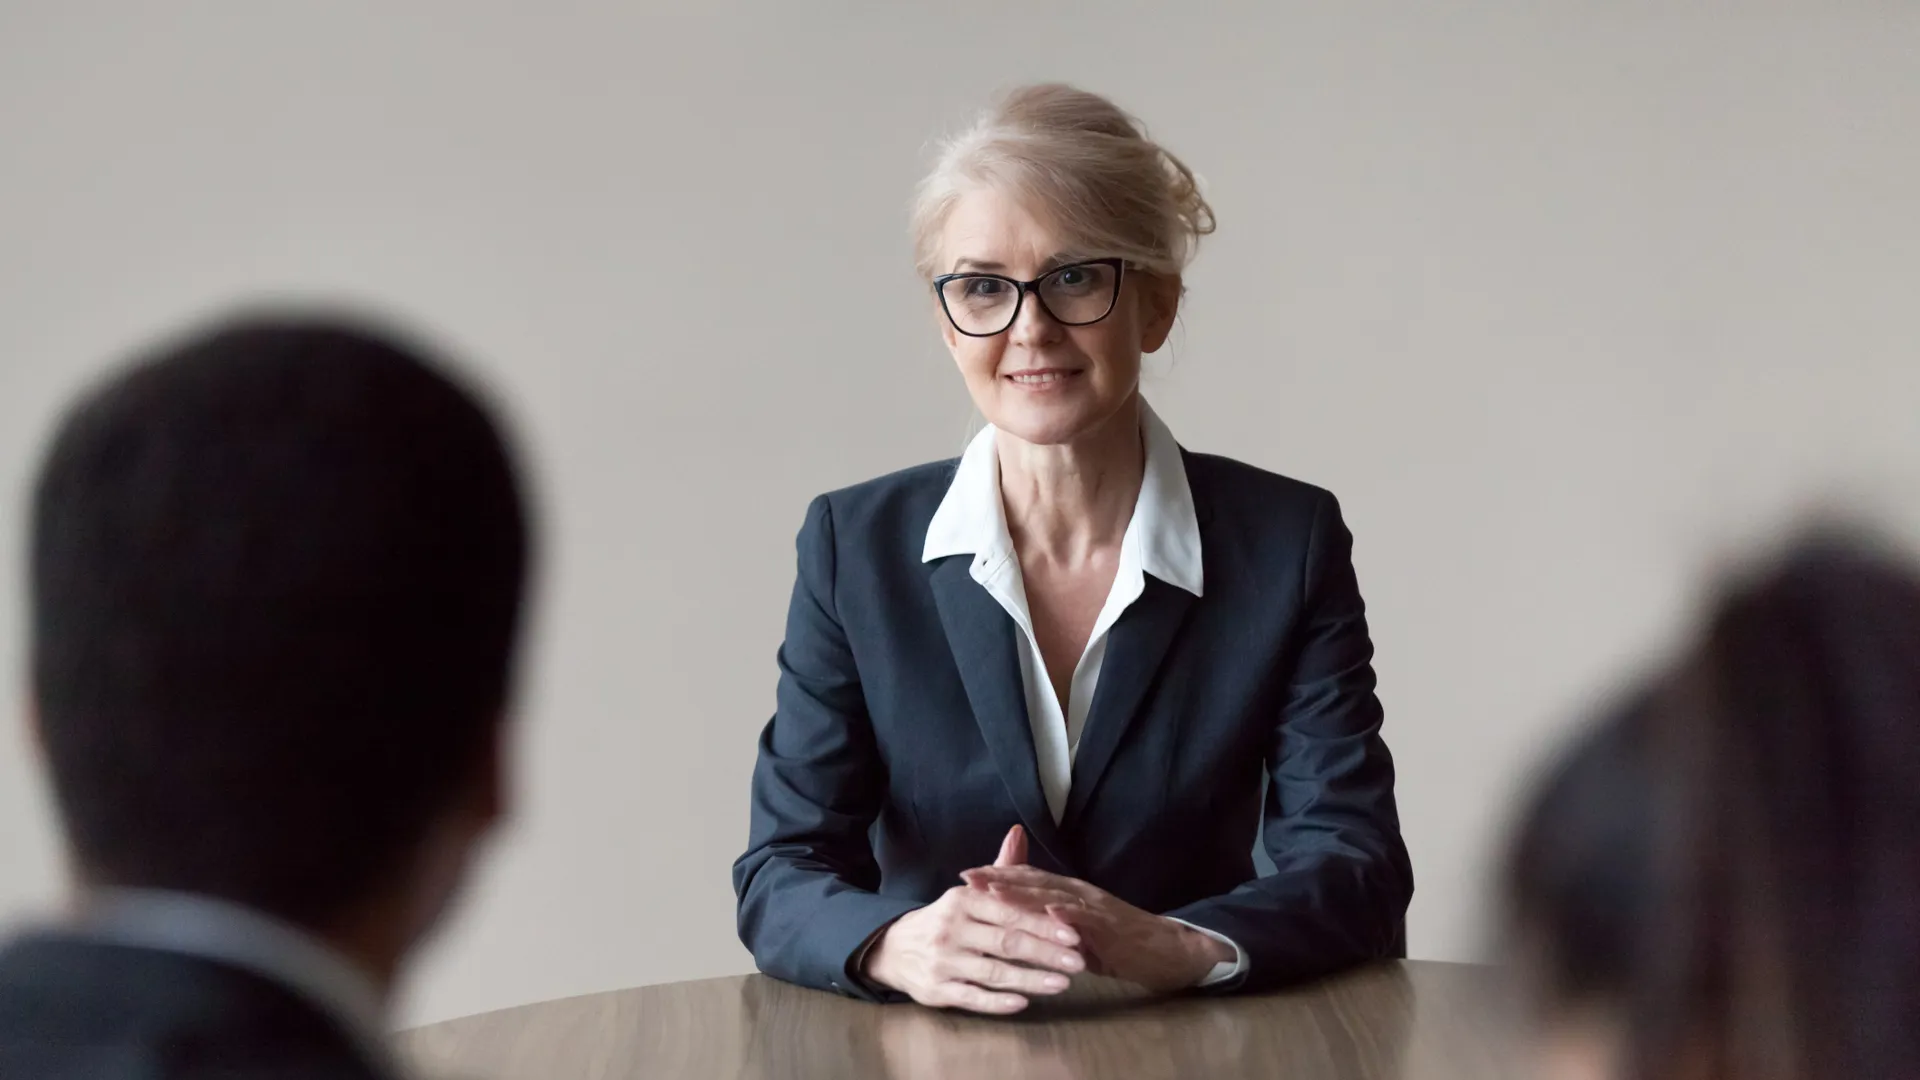 Smiling middle aged senior female job applicant listening to hr questions making first impression at interview, recruiters interviewing older mature candidate, recruitment, age and employment concept.